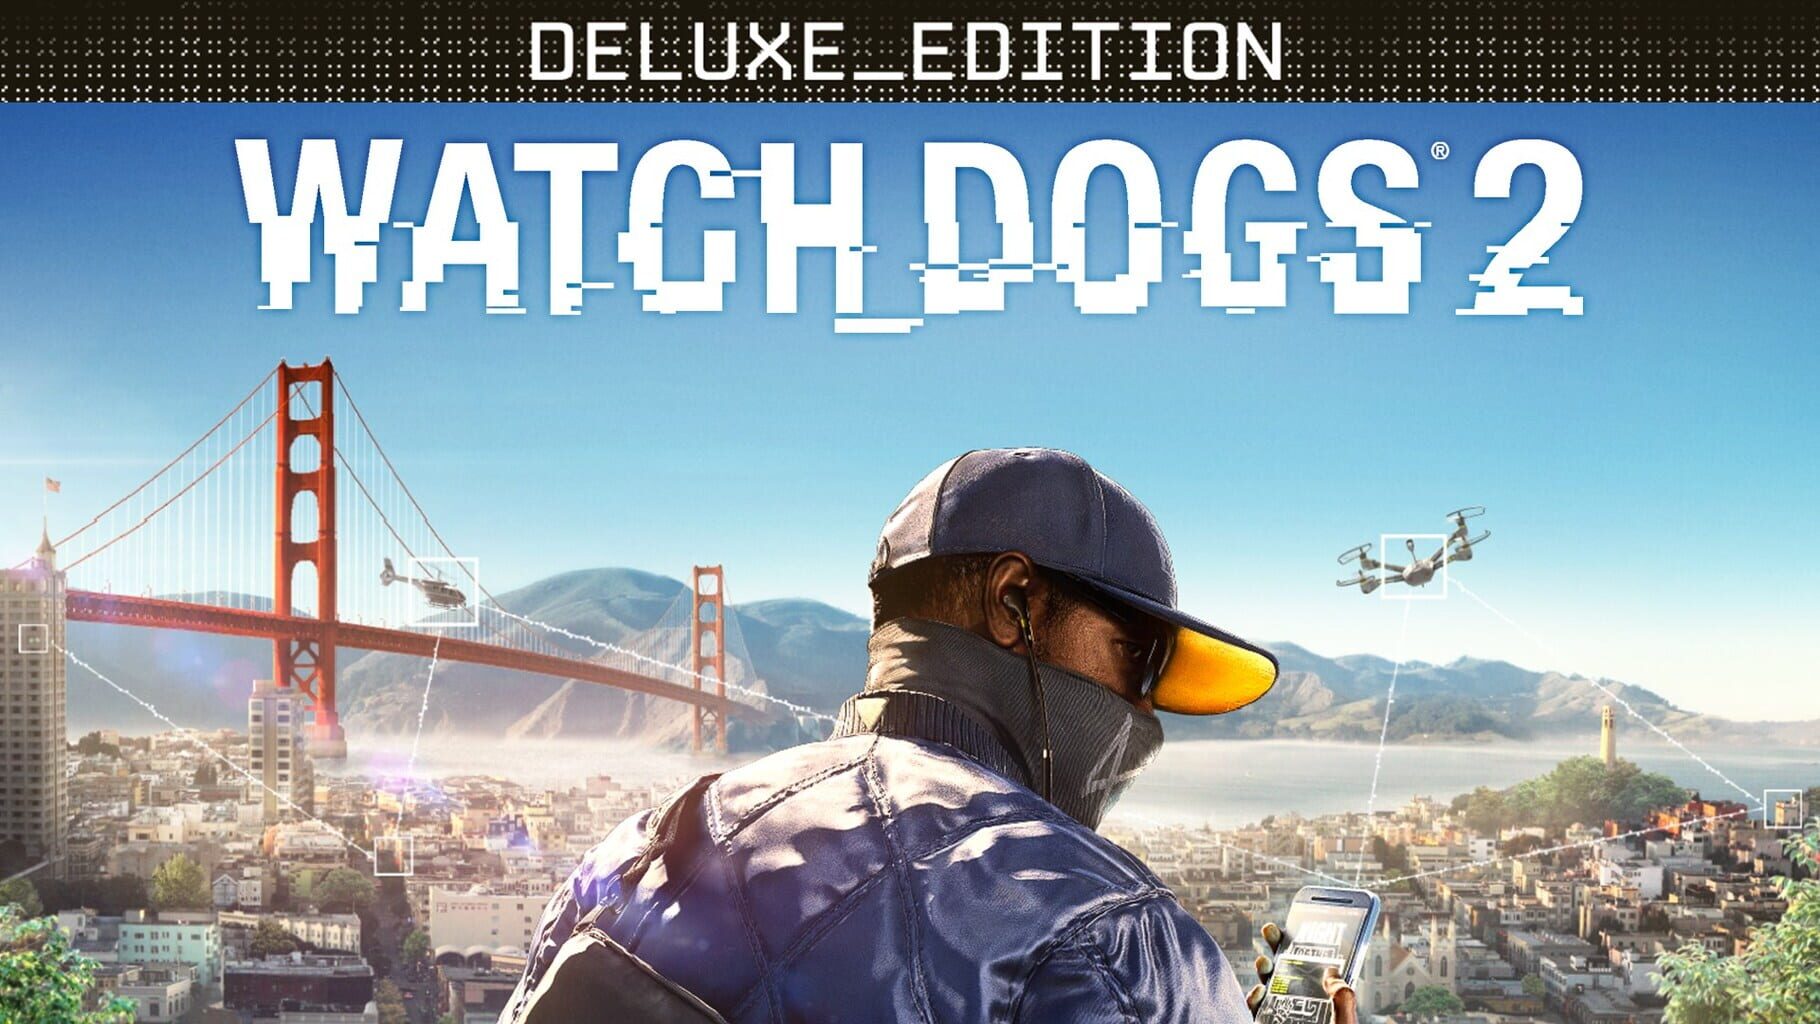 Arte - Watch Dogs 2: Deluxe Edition